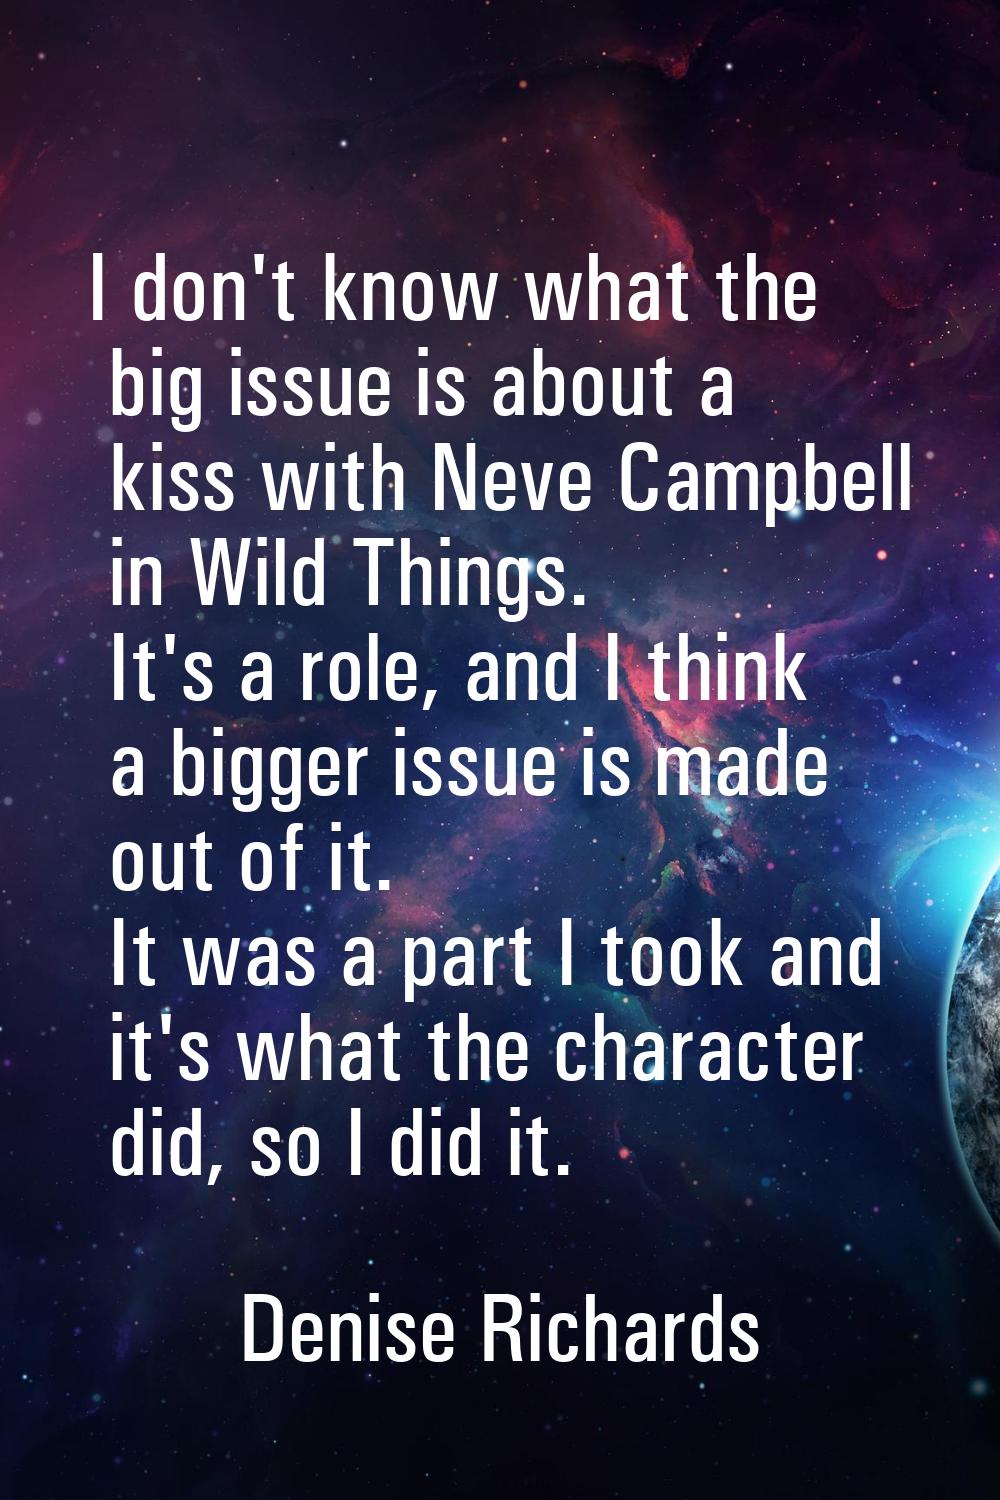 I don't know what the big issue is about a kiss with Neve Campbell in Wild Things. It's a role, and